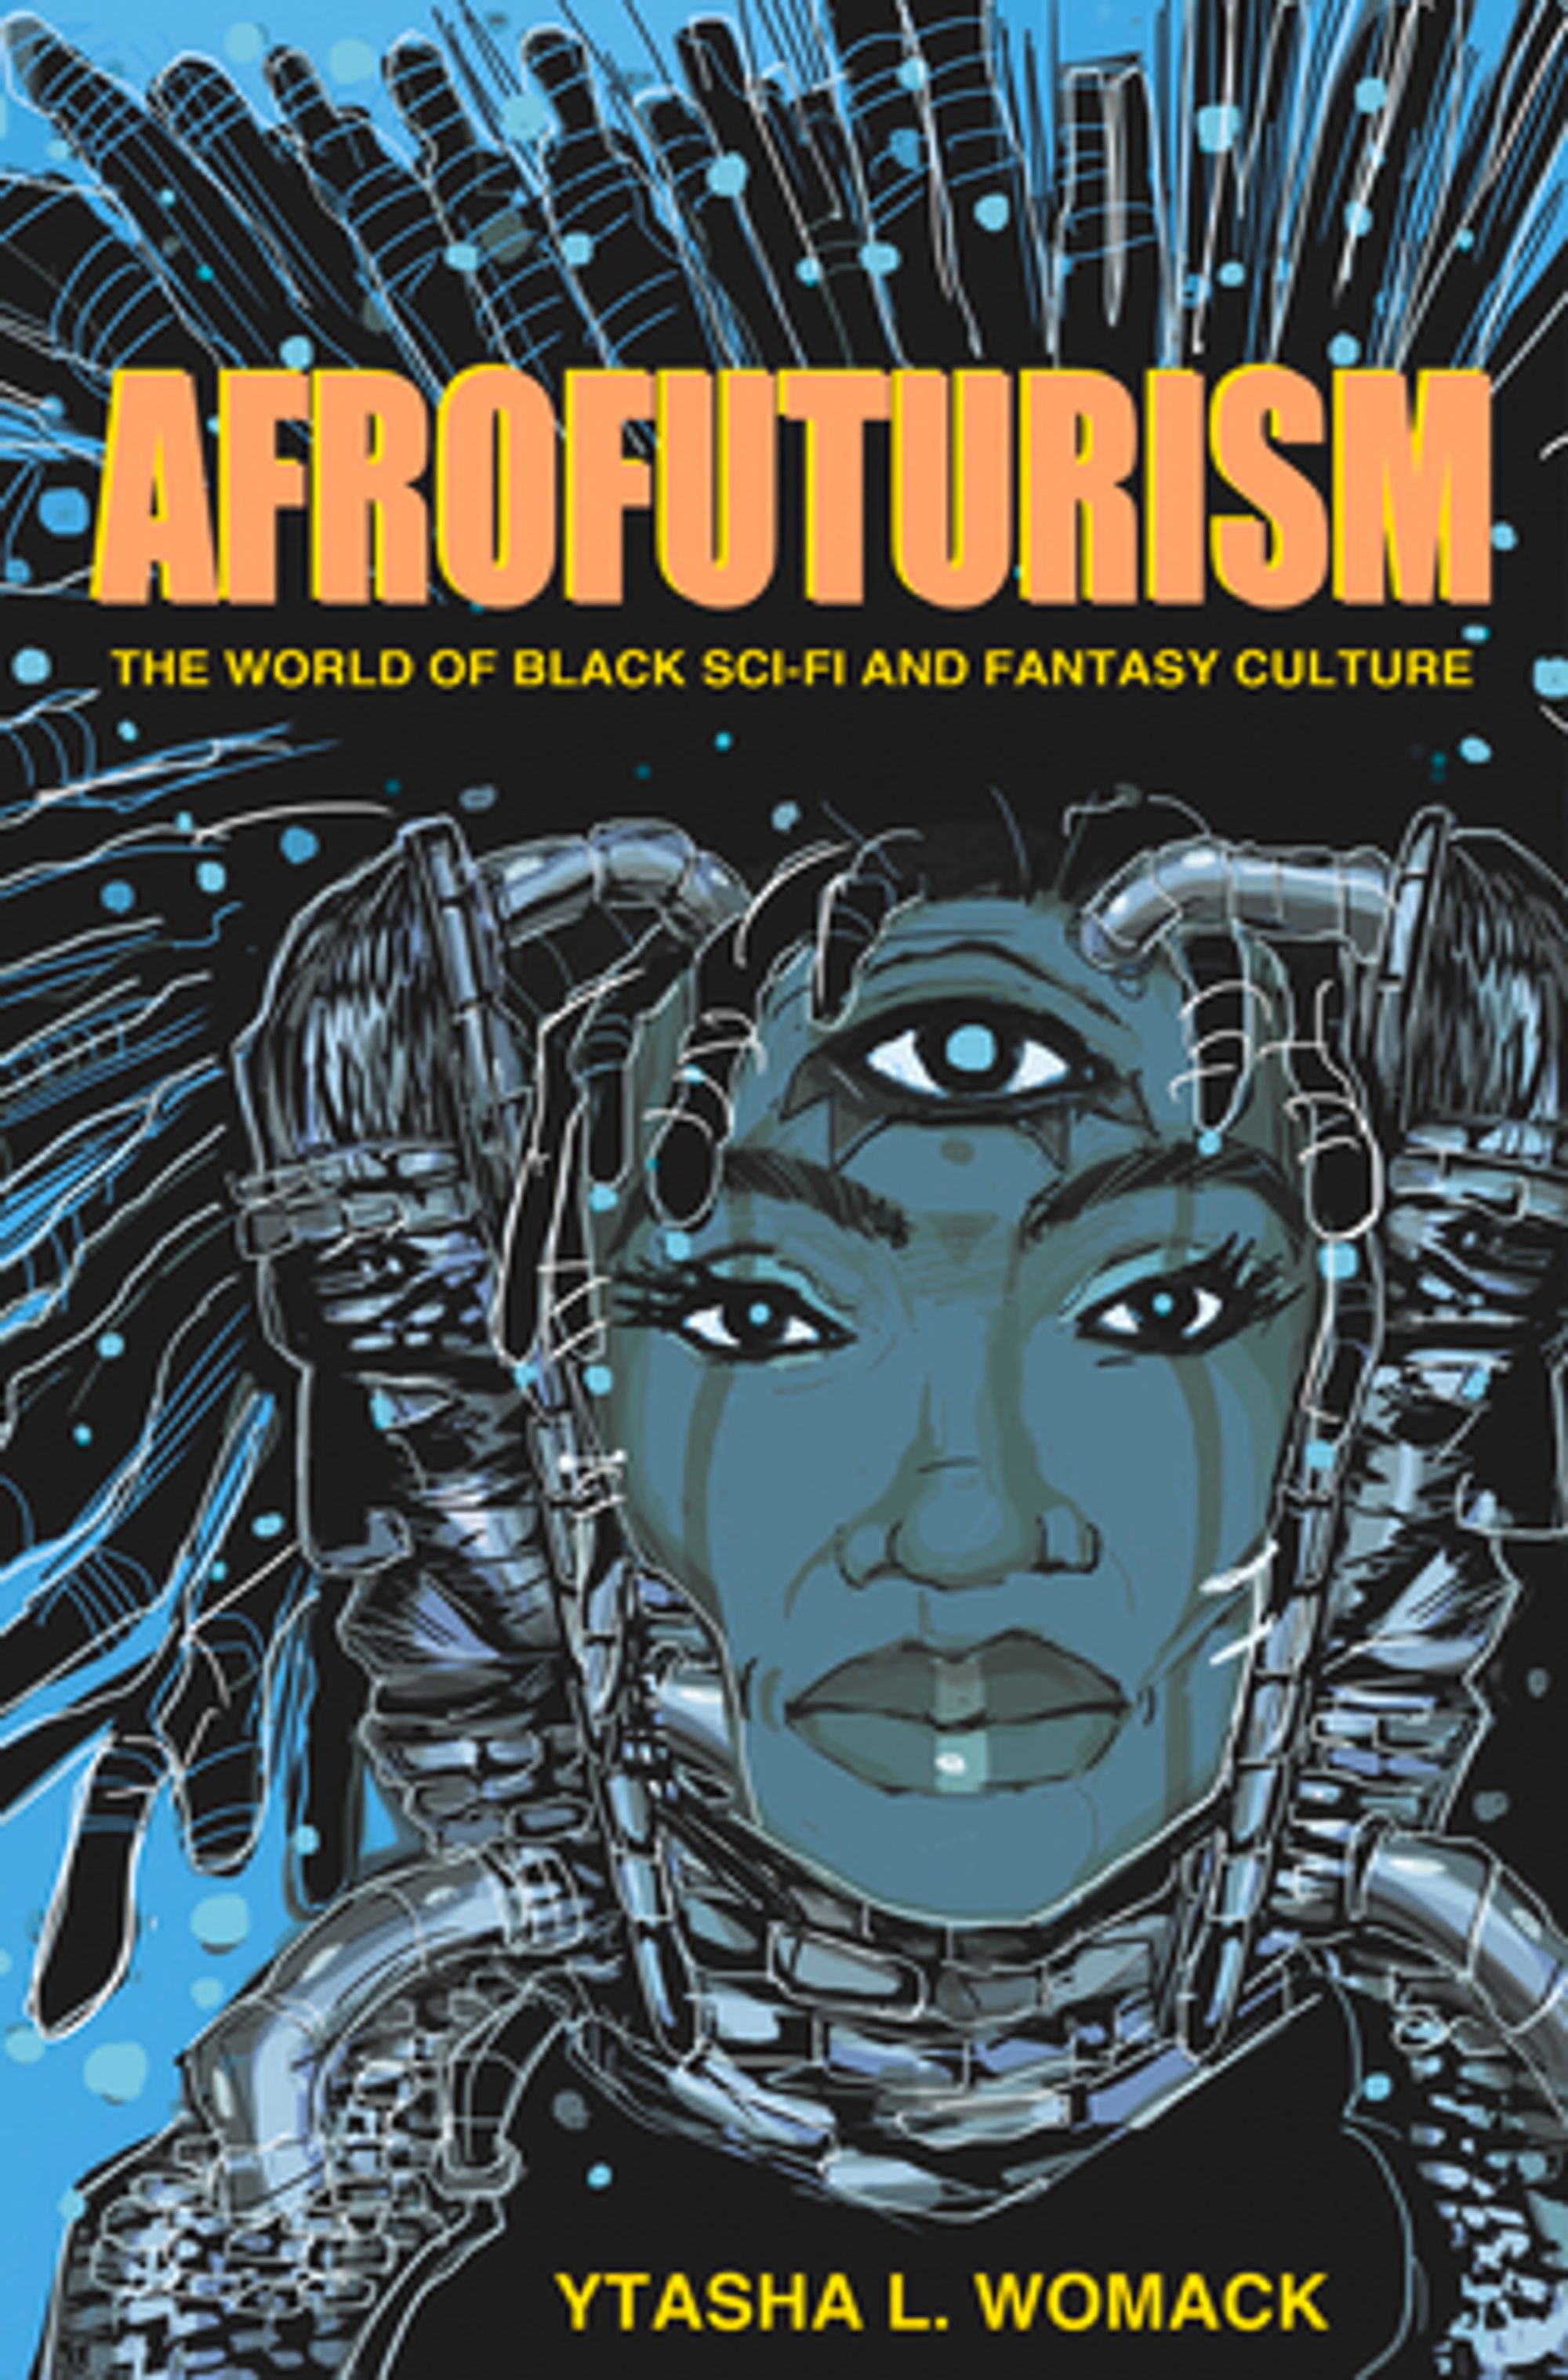 "Afrofuturism: The World of Black Sci-Fi and Fantasy Culture" by Ytasha L. Womack, 2014